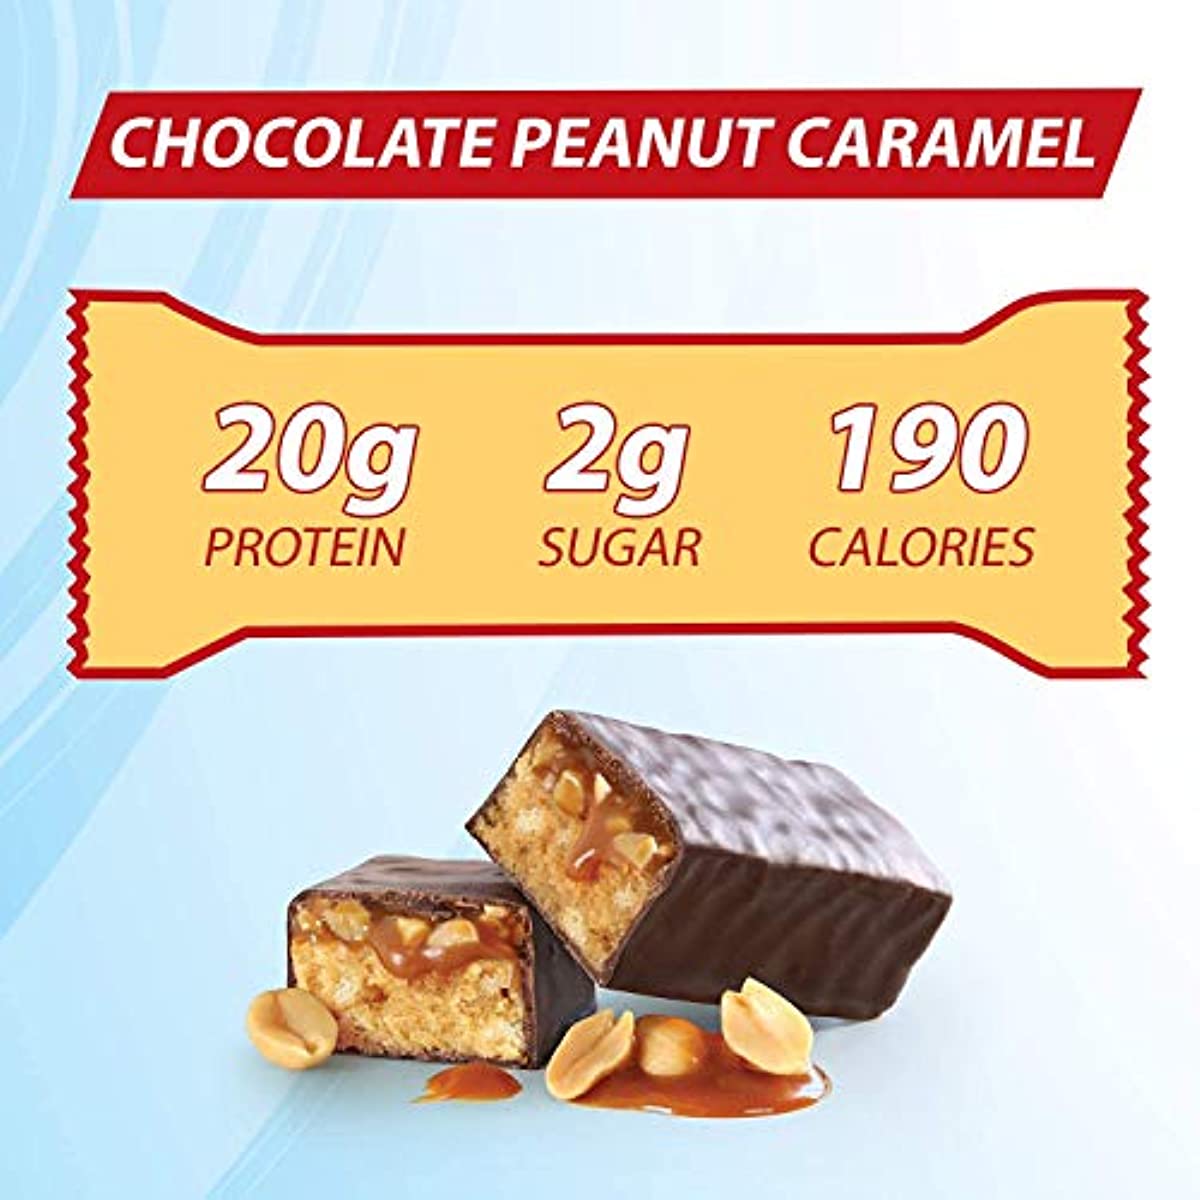 Pure Protein Bars, High Protein, Nutritious Snacks to Support Energy, Low Sugar, Gluten Free, Chocolate Peanut Caramel, 1.76 oz., 12 Count